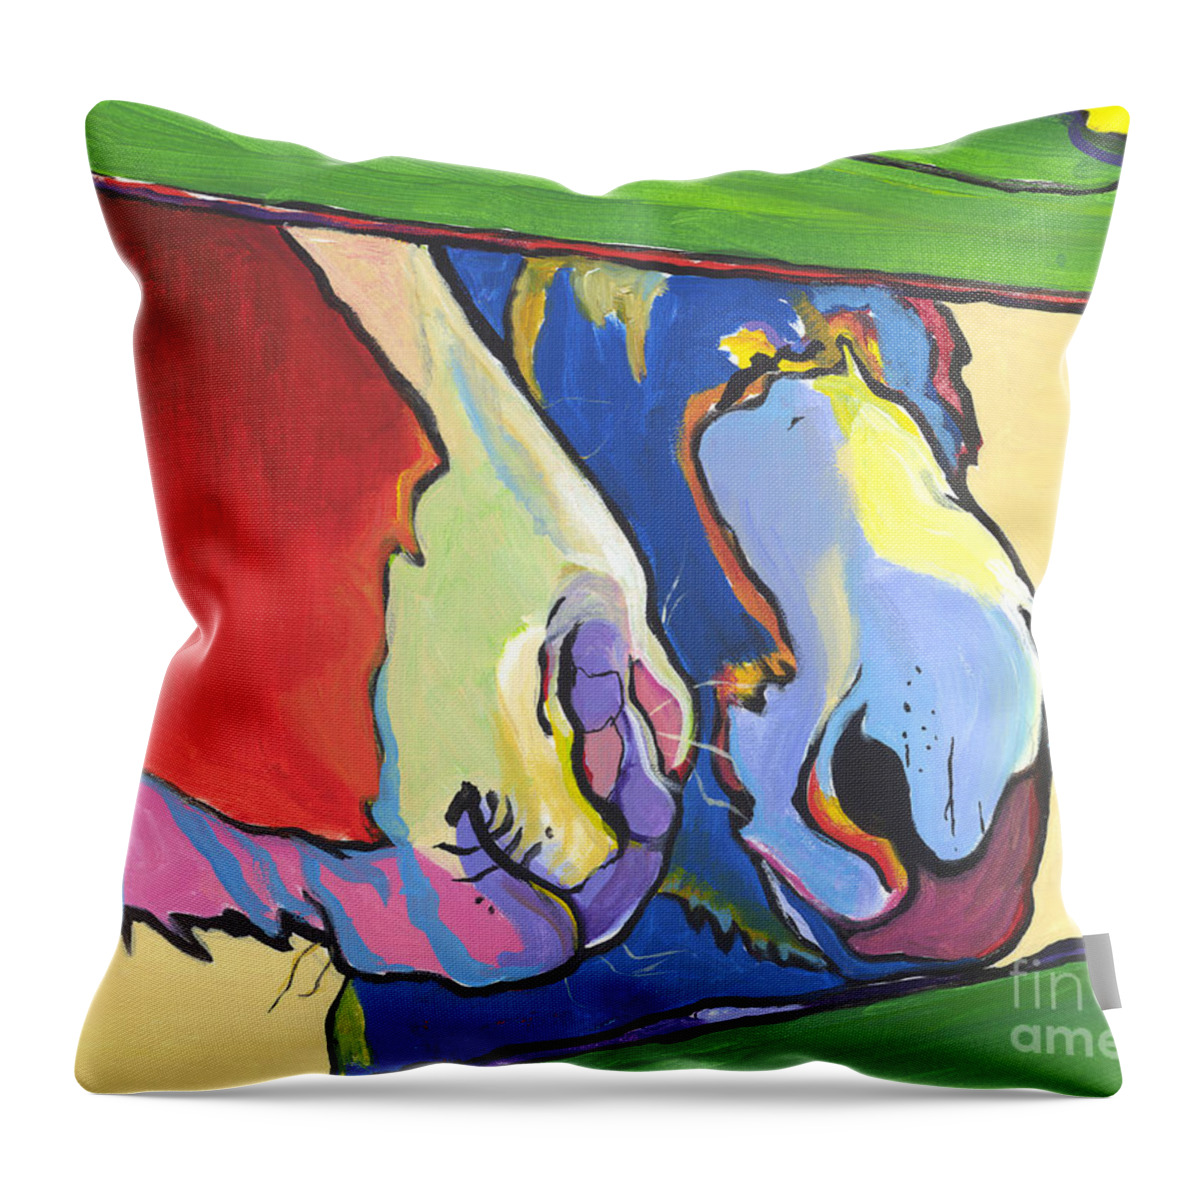 Pat Saunders-white Canvas Prints Throw Pillow featuring the painting Green Fence by Pat Saunders-White